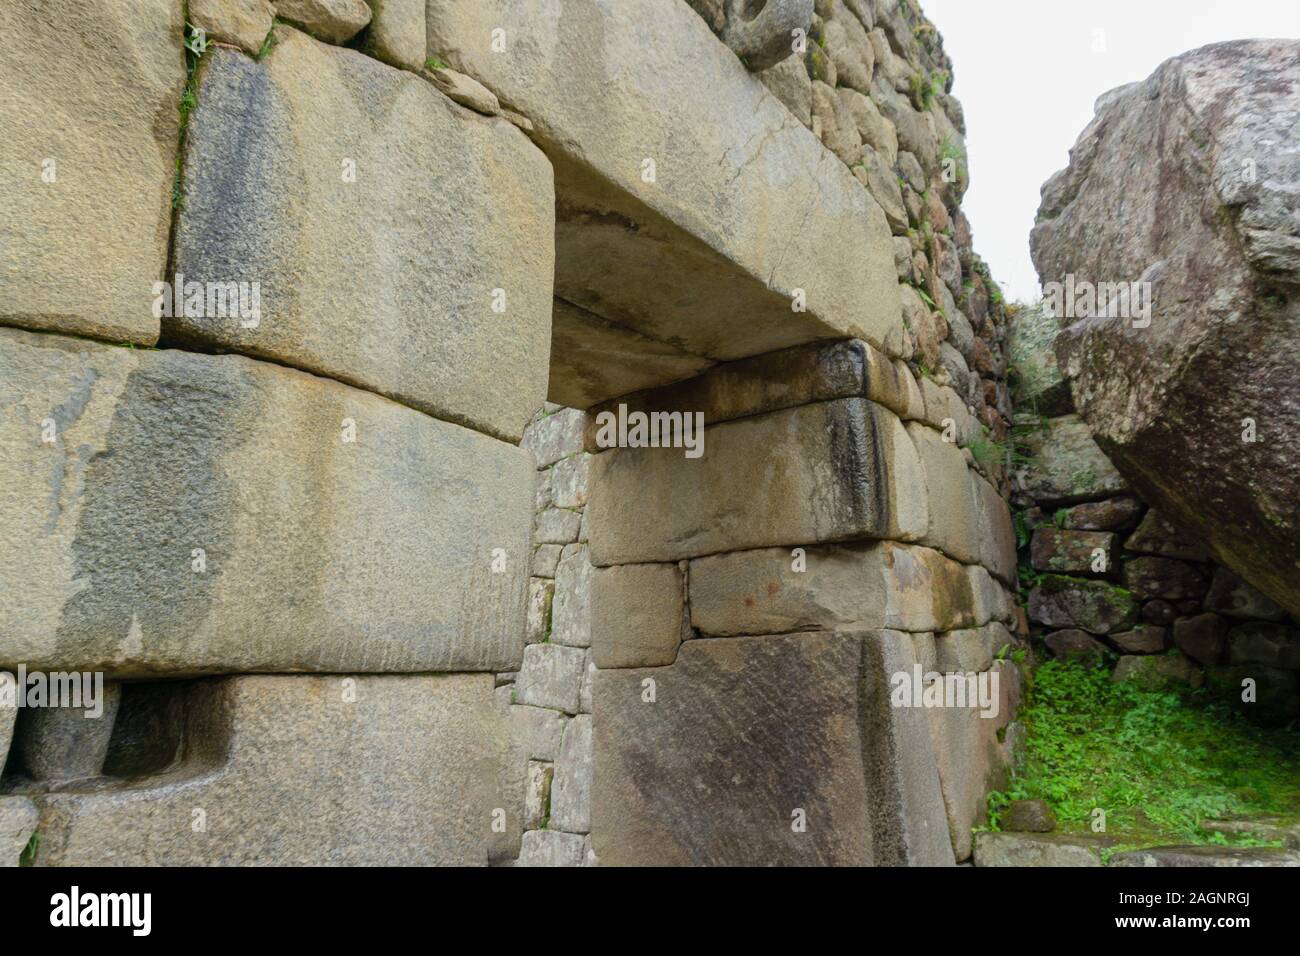 The mysterious Machu Picchu! You will understand why people wonder how it was built when you visit the place yourself. Stock Photo